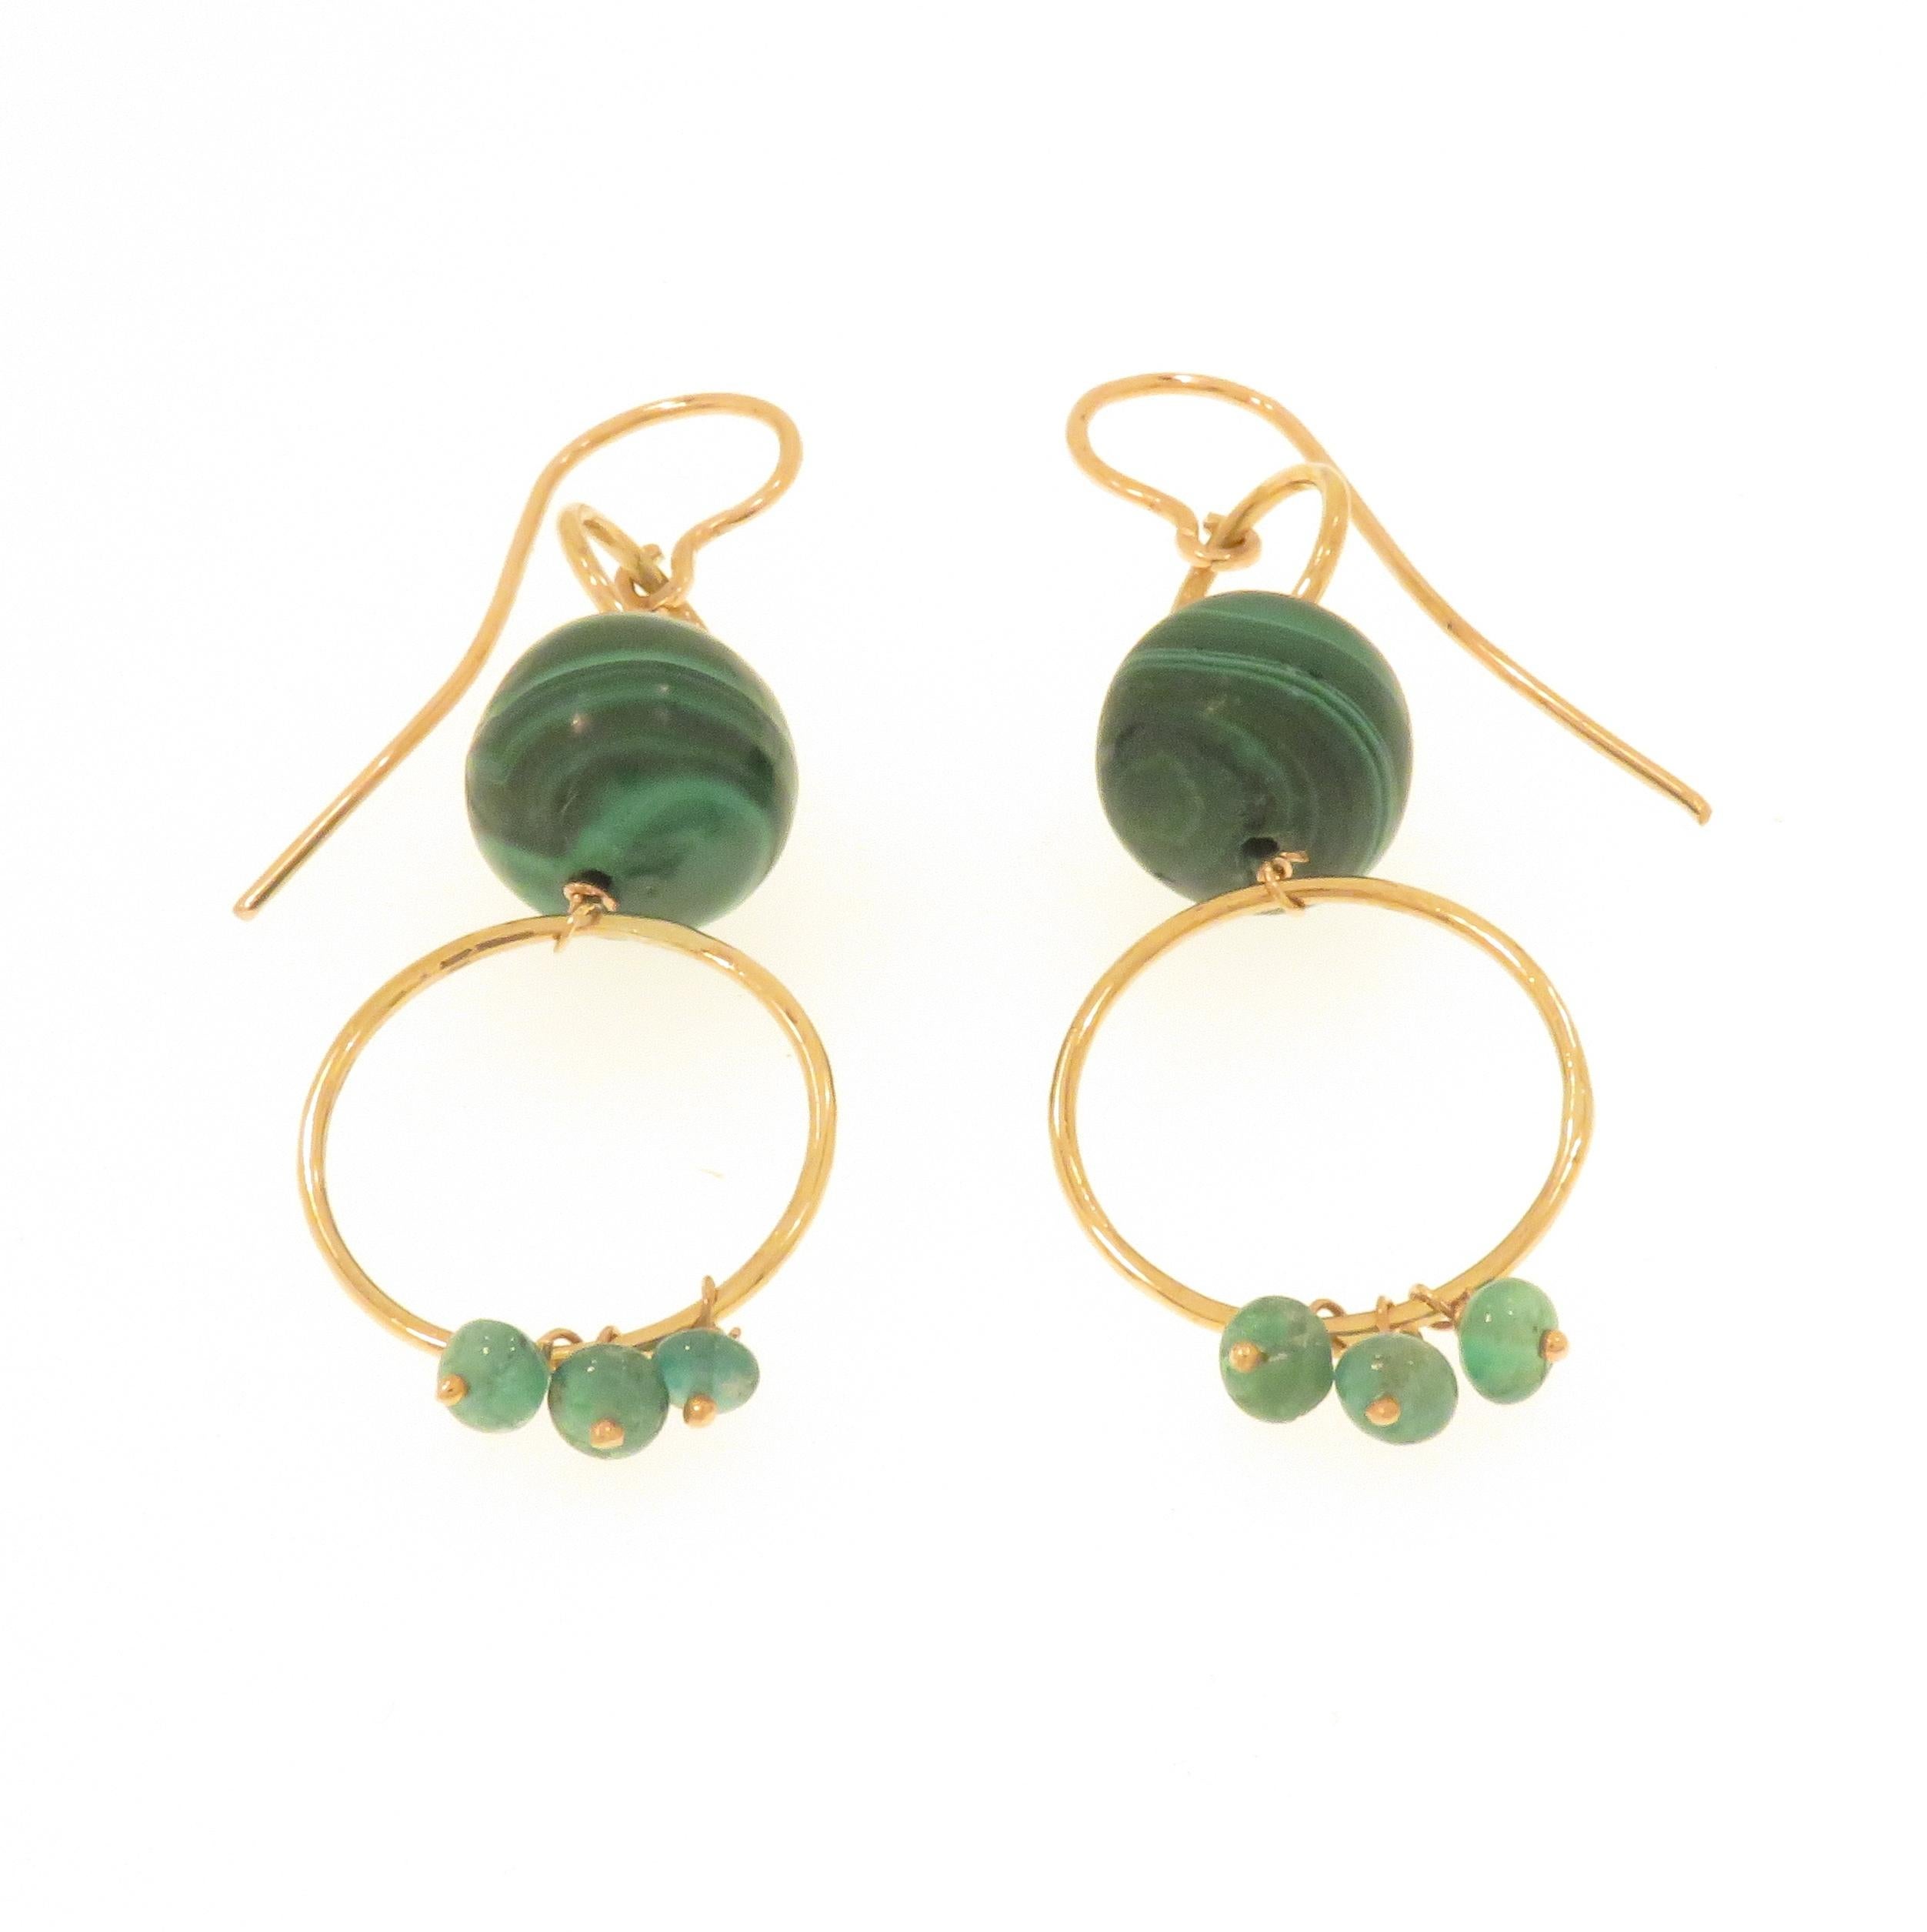 Dangle earrings with natural malachite beads and 6 green emerald  little beads, handcrafted in 9 karat rose gold. The total length of each earring is 60 mm / 2.362 inches. They are marked with the Italian Gold Mark 375 and Botta Gioielli brandmark